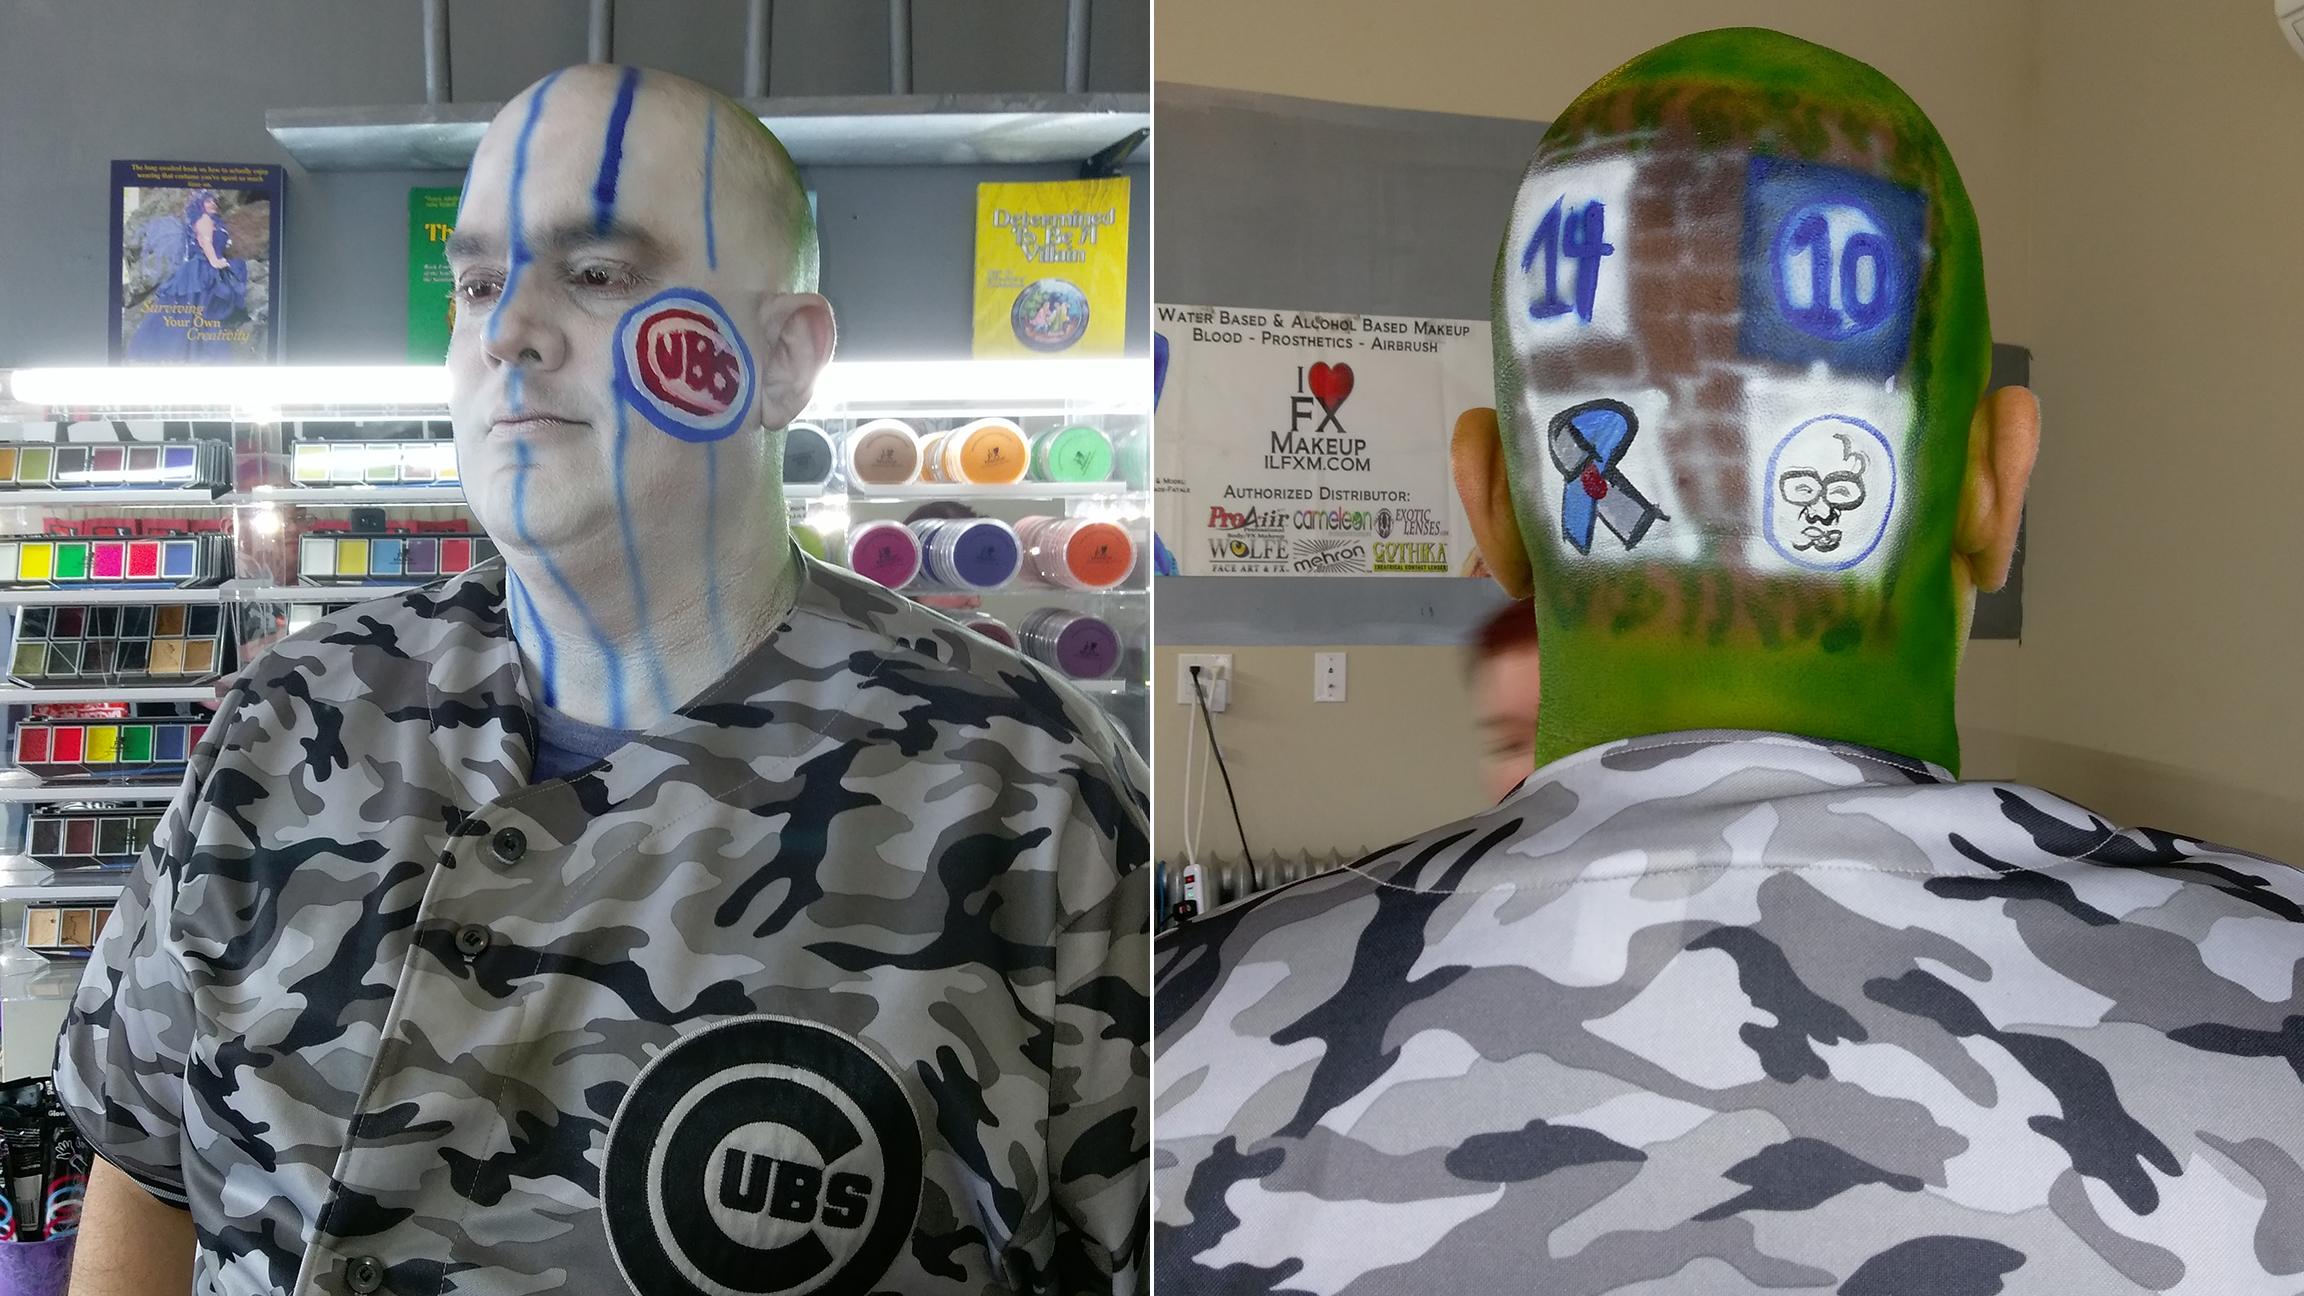 Russell Duffer shows off a Cubs-themed pinstripes-and-ivy paint job courtesy of makeup artist Colleen Jones. (Erica Gunderson / Chicago Tonight)